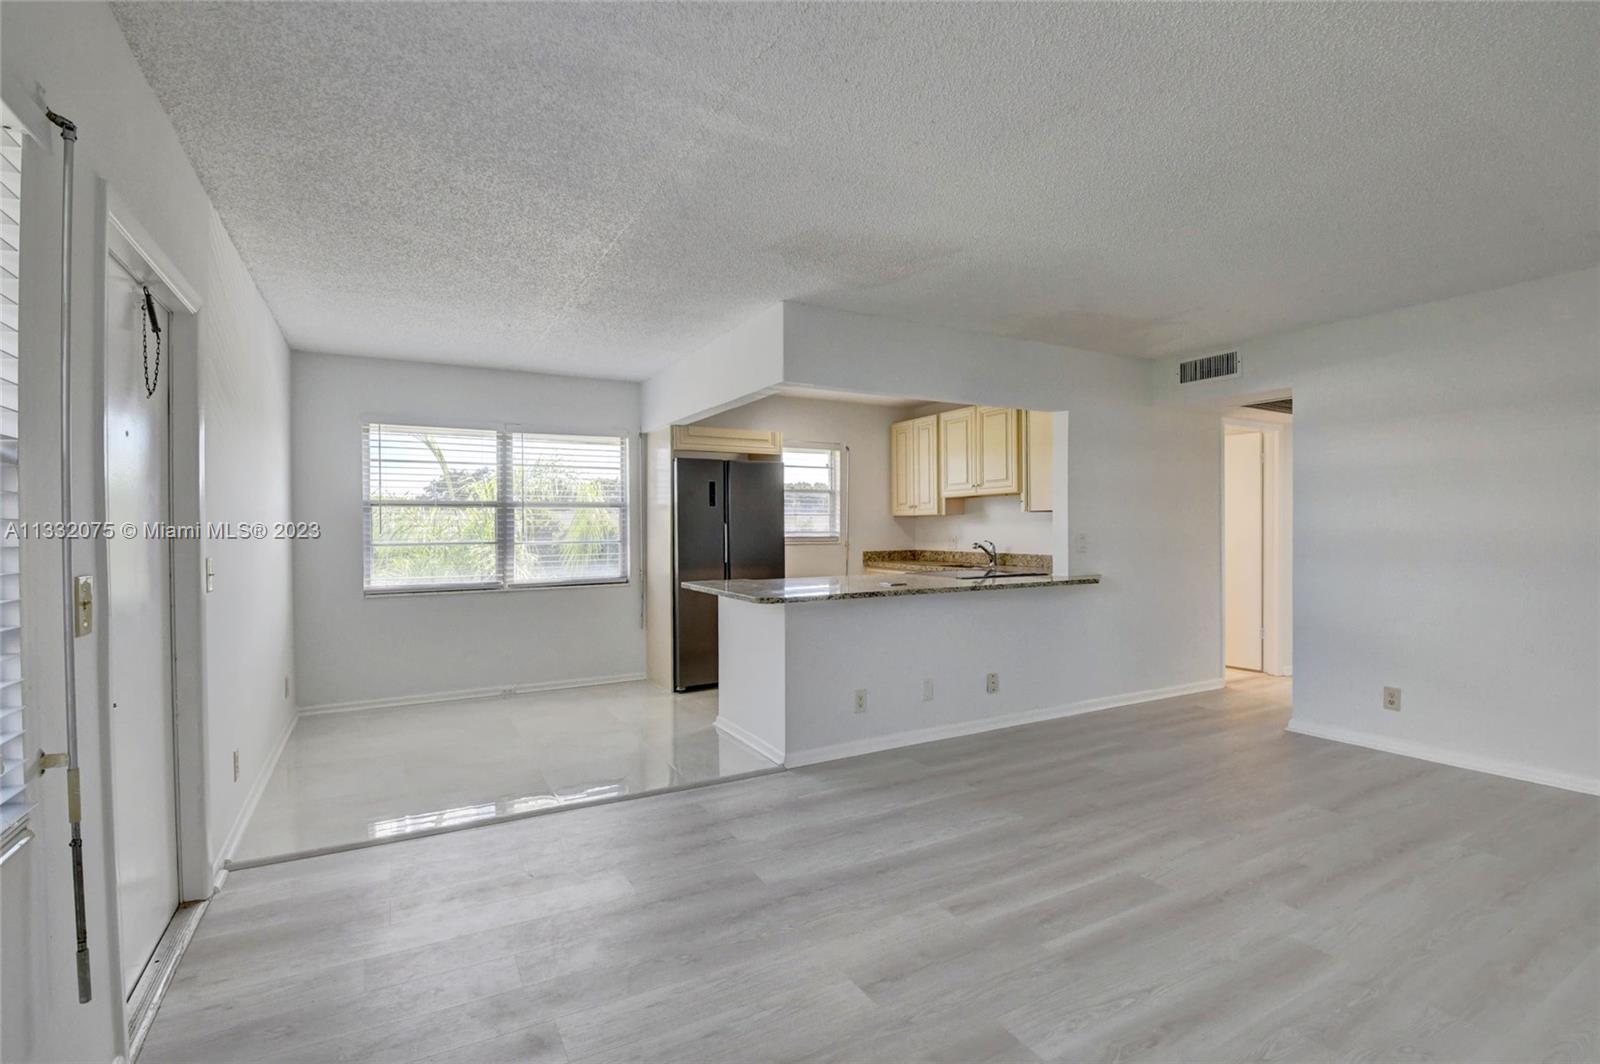 Totally renovated, bright, spacious corner unit with garden view. All the electrical, plumbing, floo